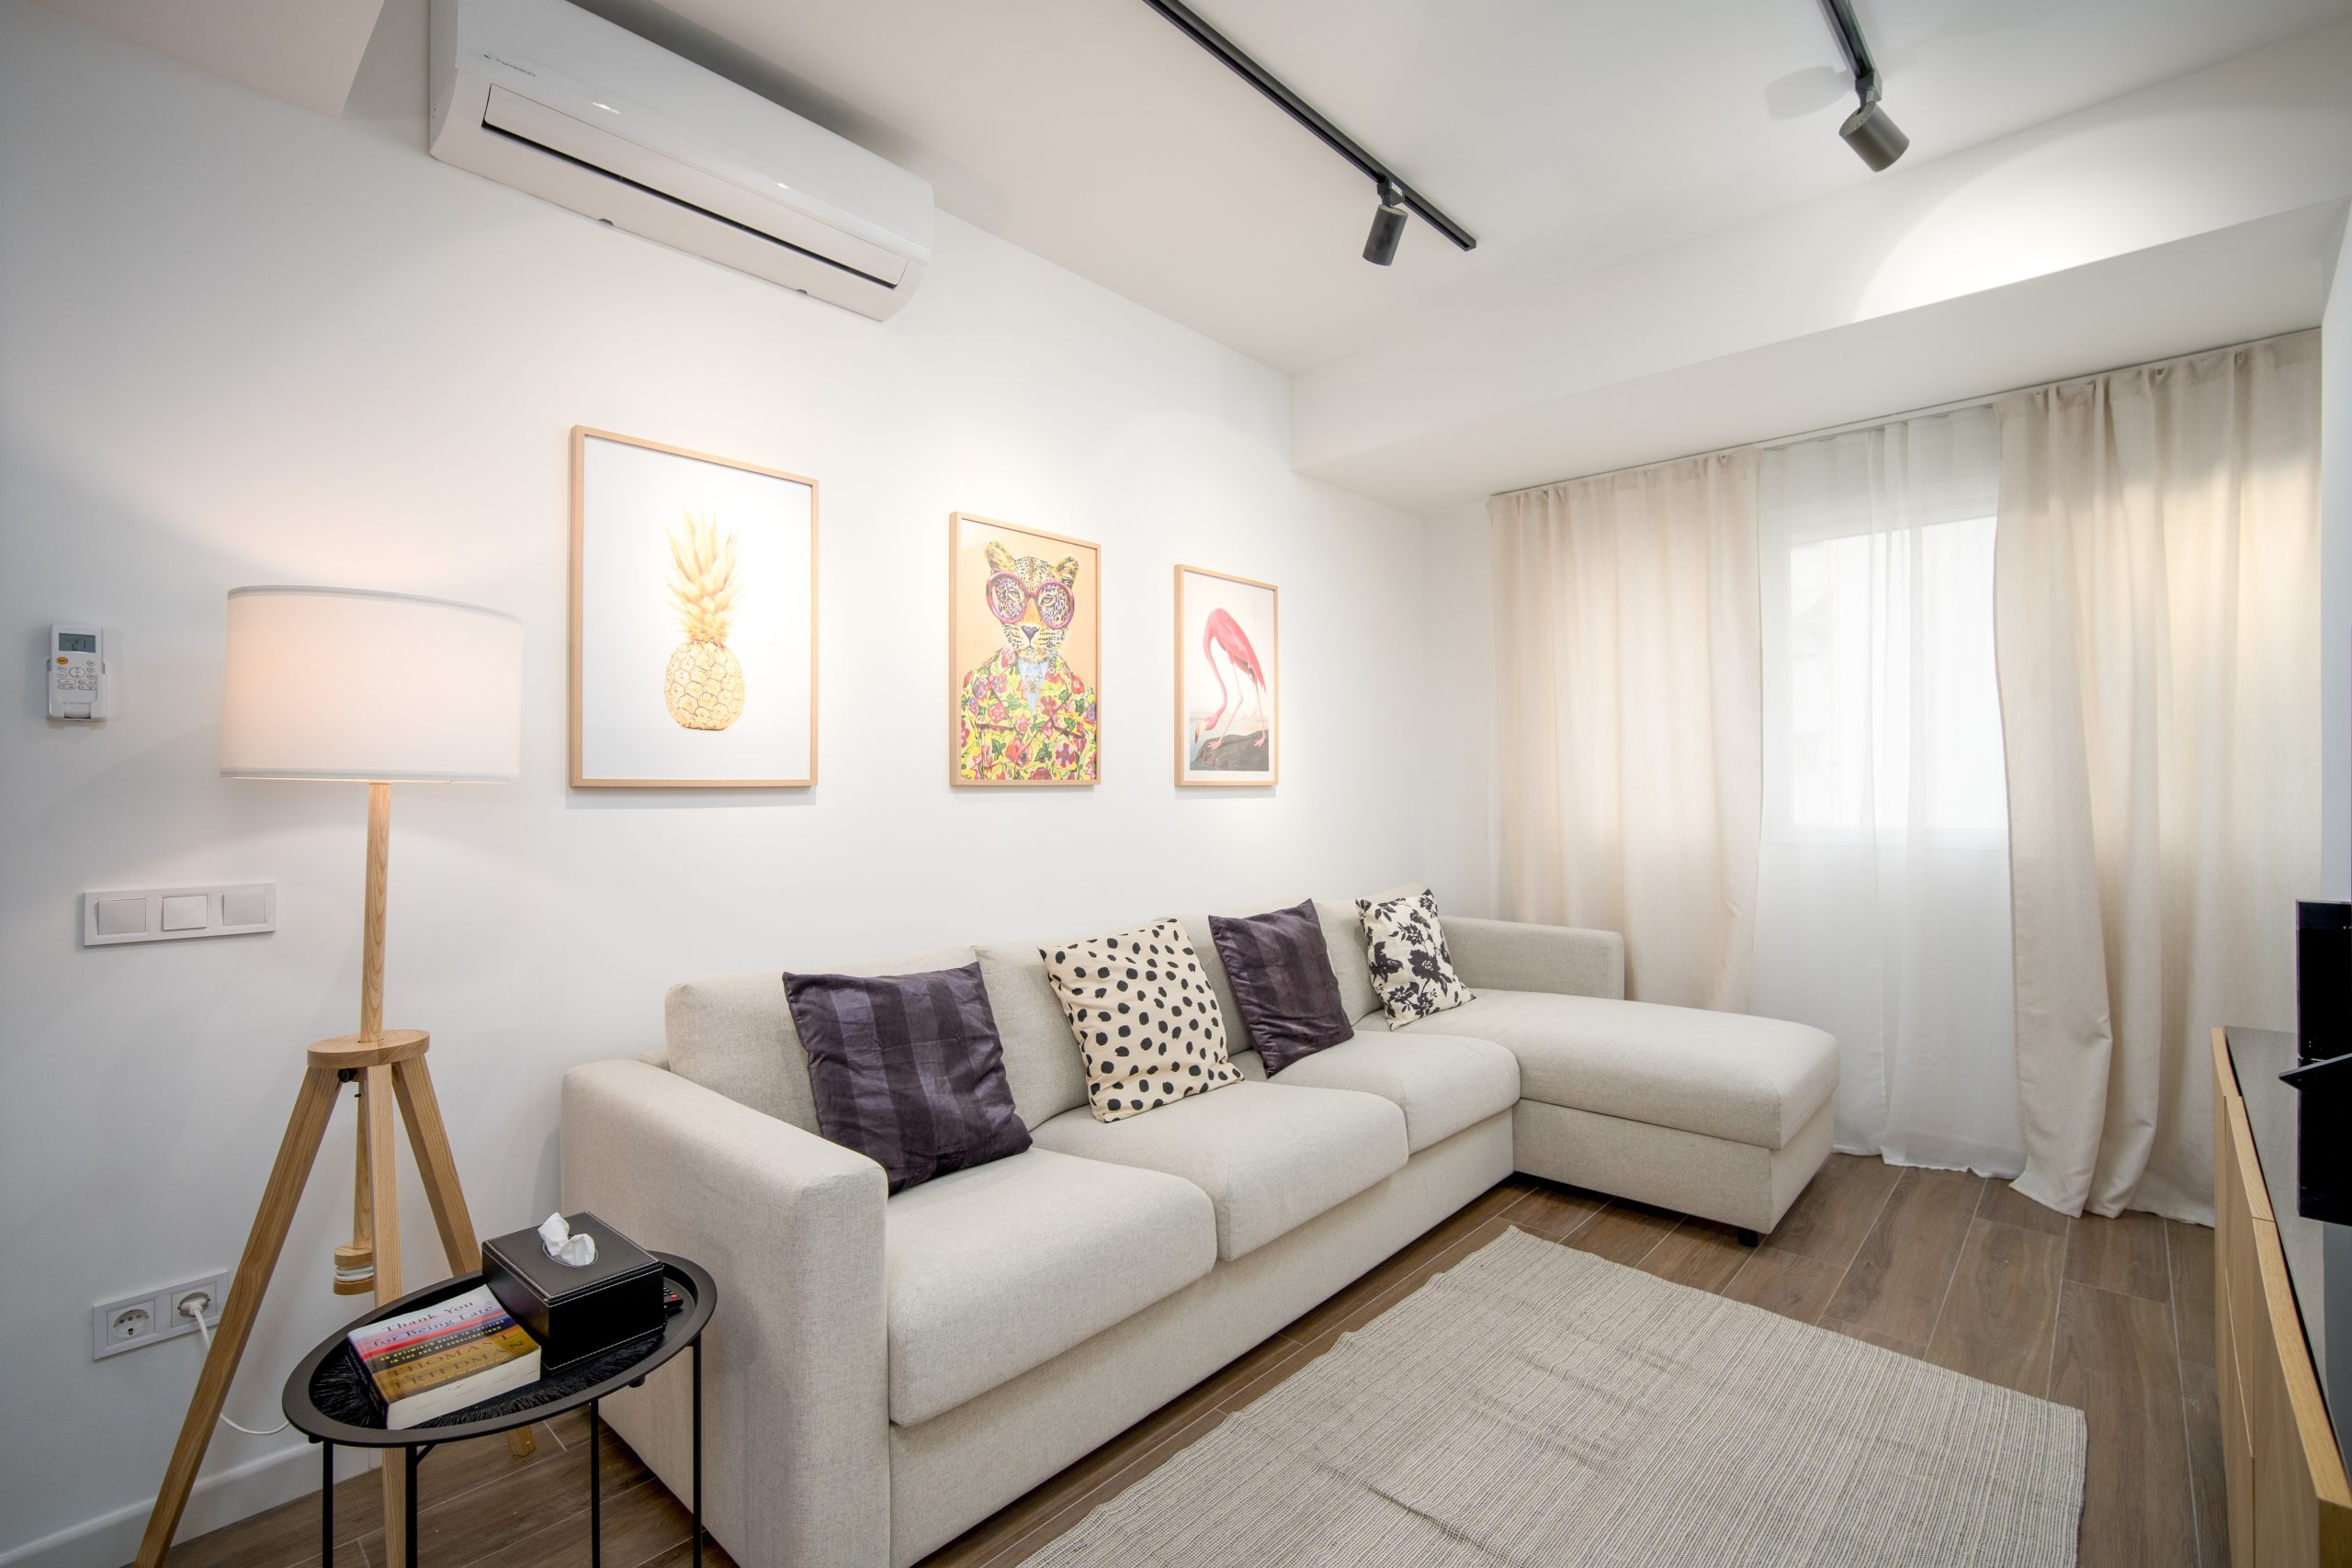 Millares - Apartment for rent in valencia living room